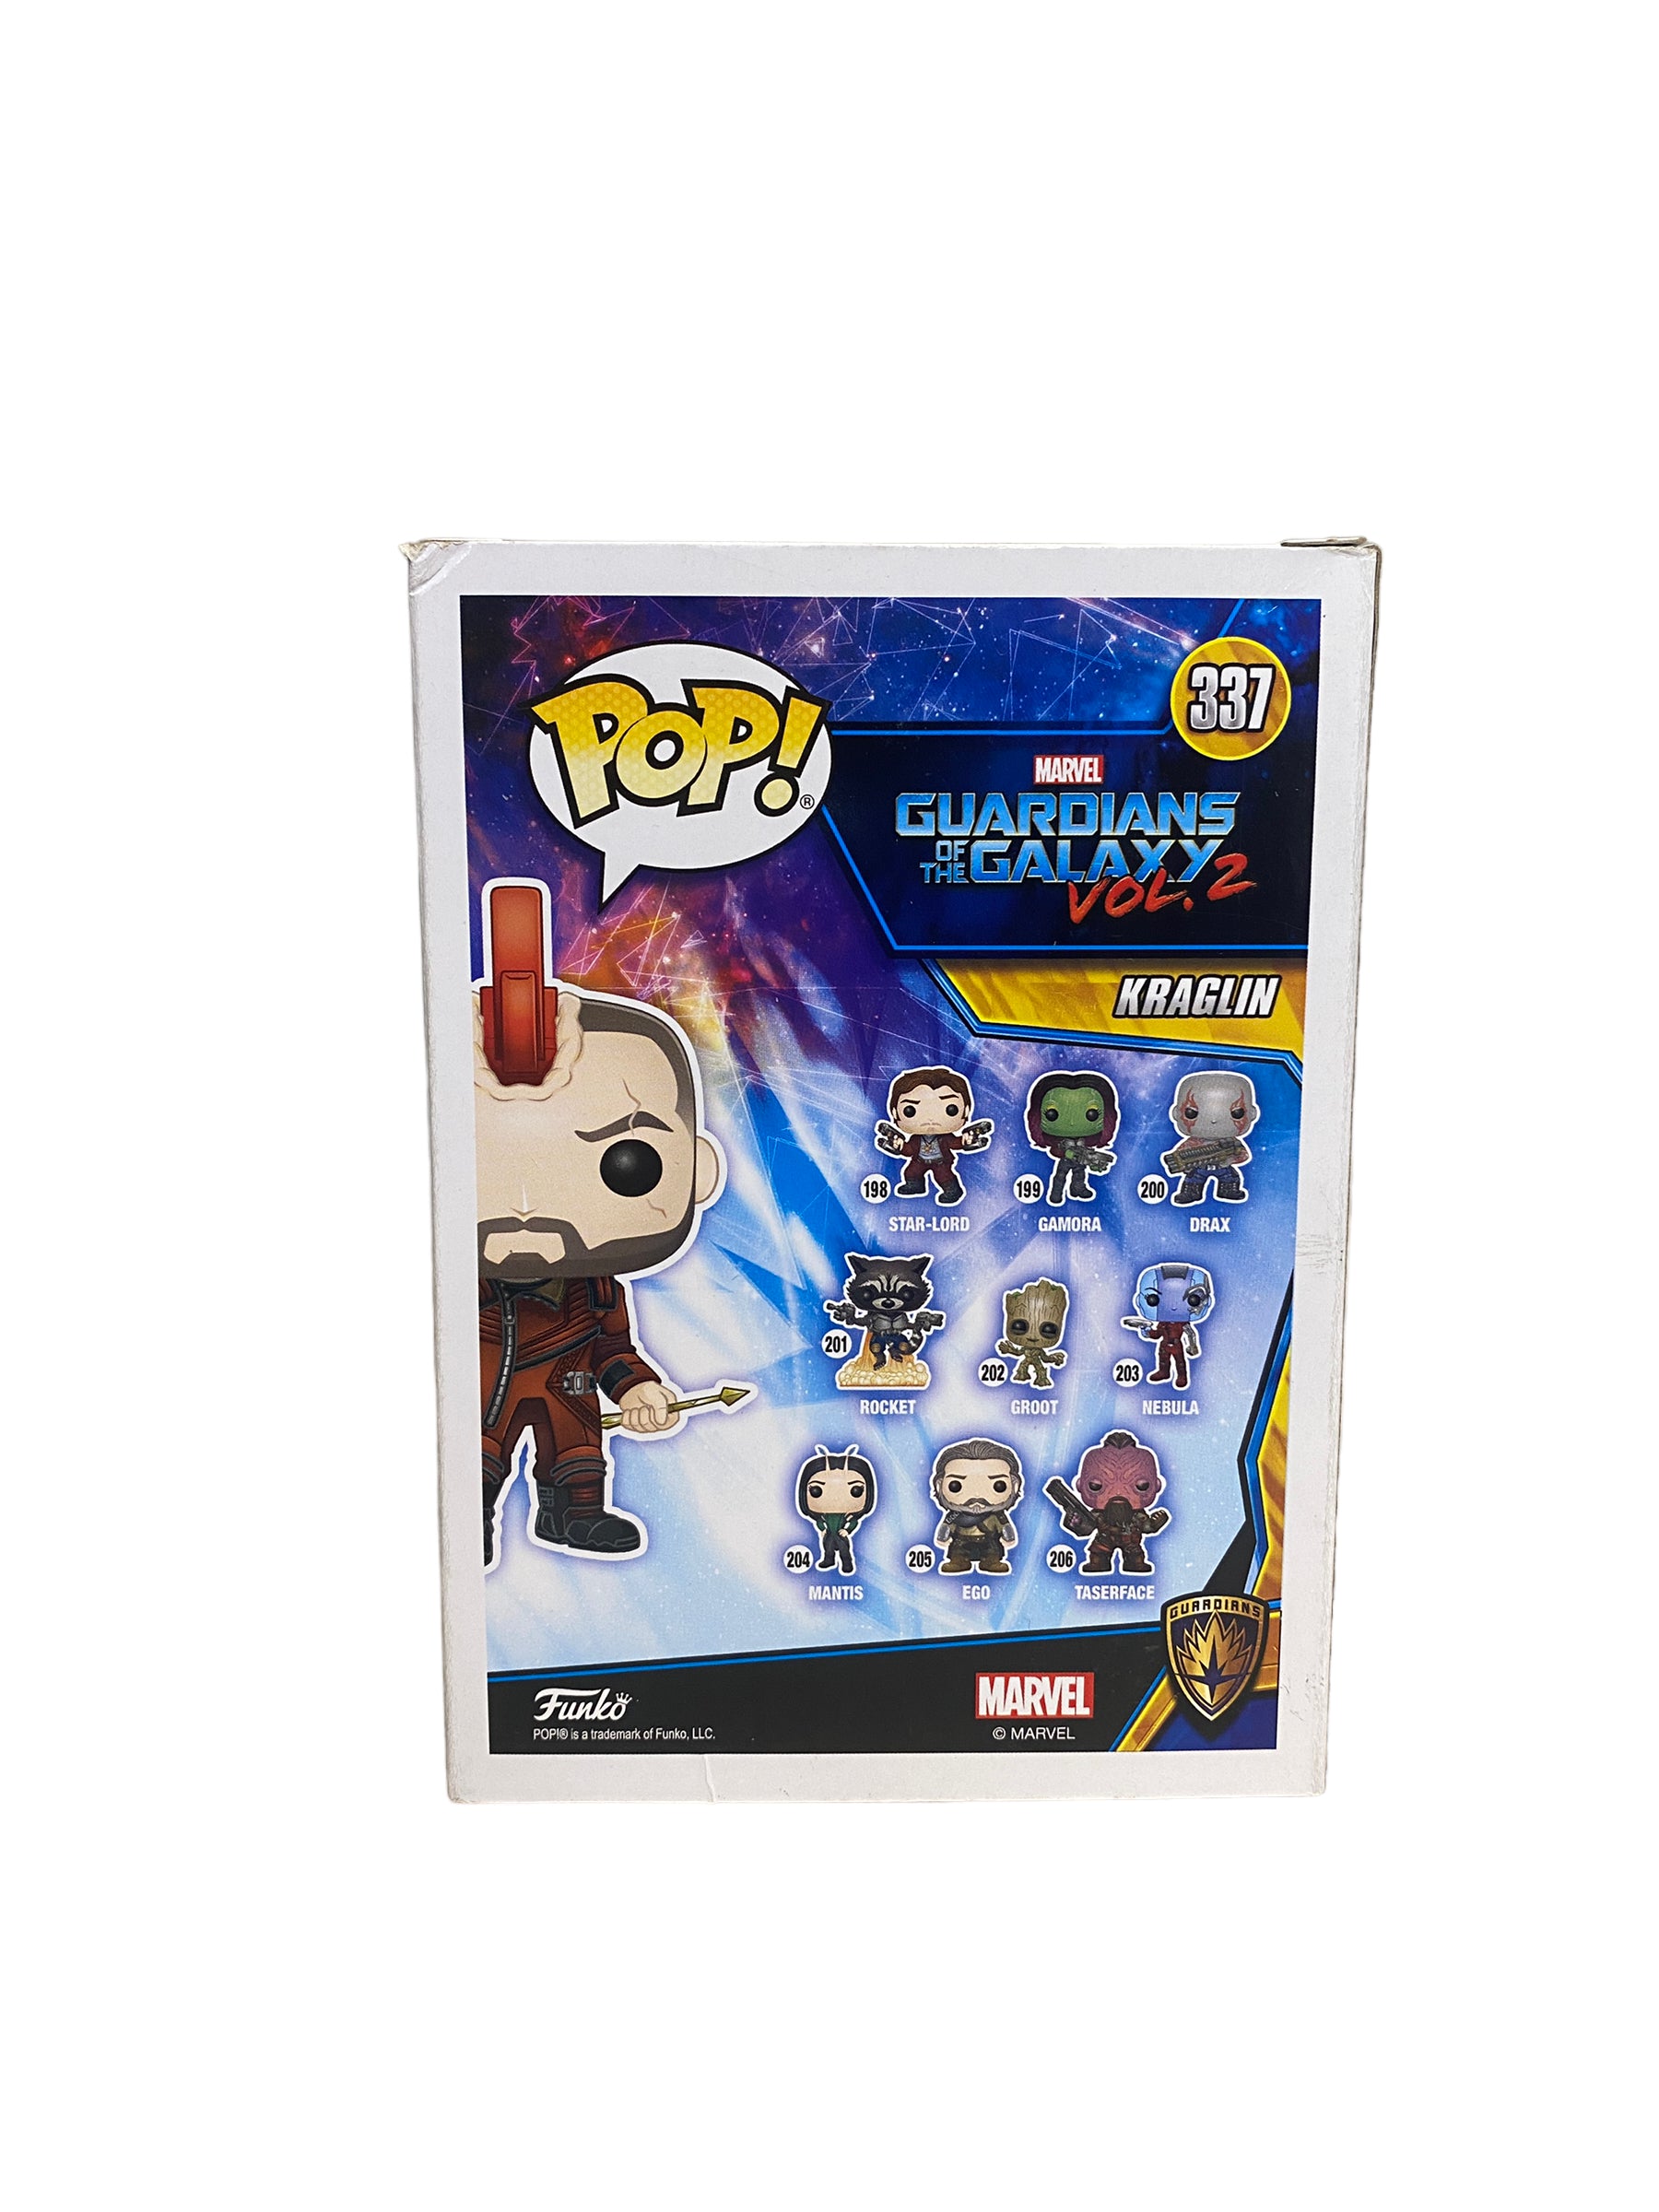 Kraglin #337 Funko Pop! - Guardians Of The Galaxy Vol.2 - SDCC 2018 Official Convention Exclusive - Condition 7.5/10